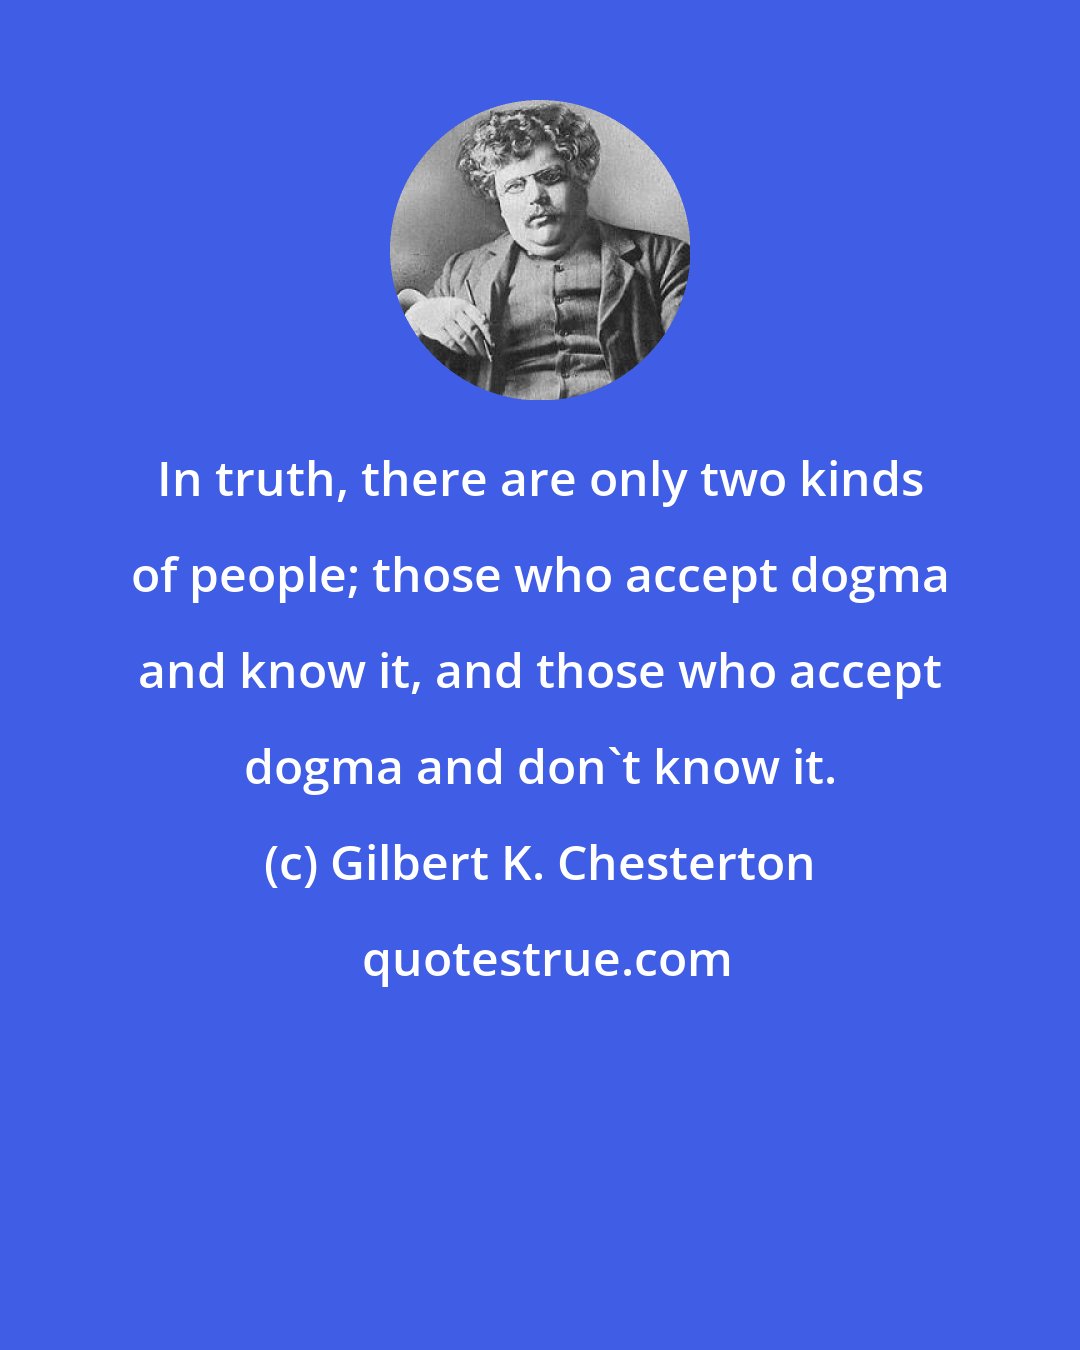 Gilbert K. Chesterton: In truth, there are only two kinds of people; those who accept dogma and know it, and those who accept dogma and don't know it.